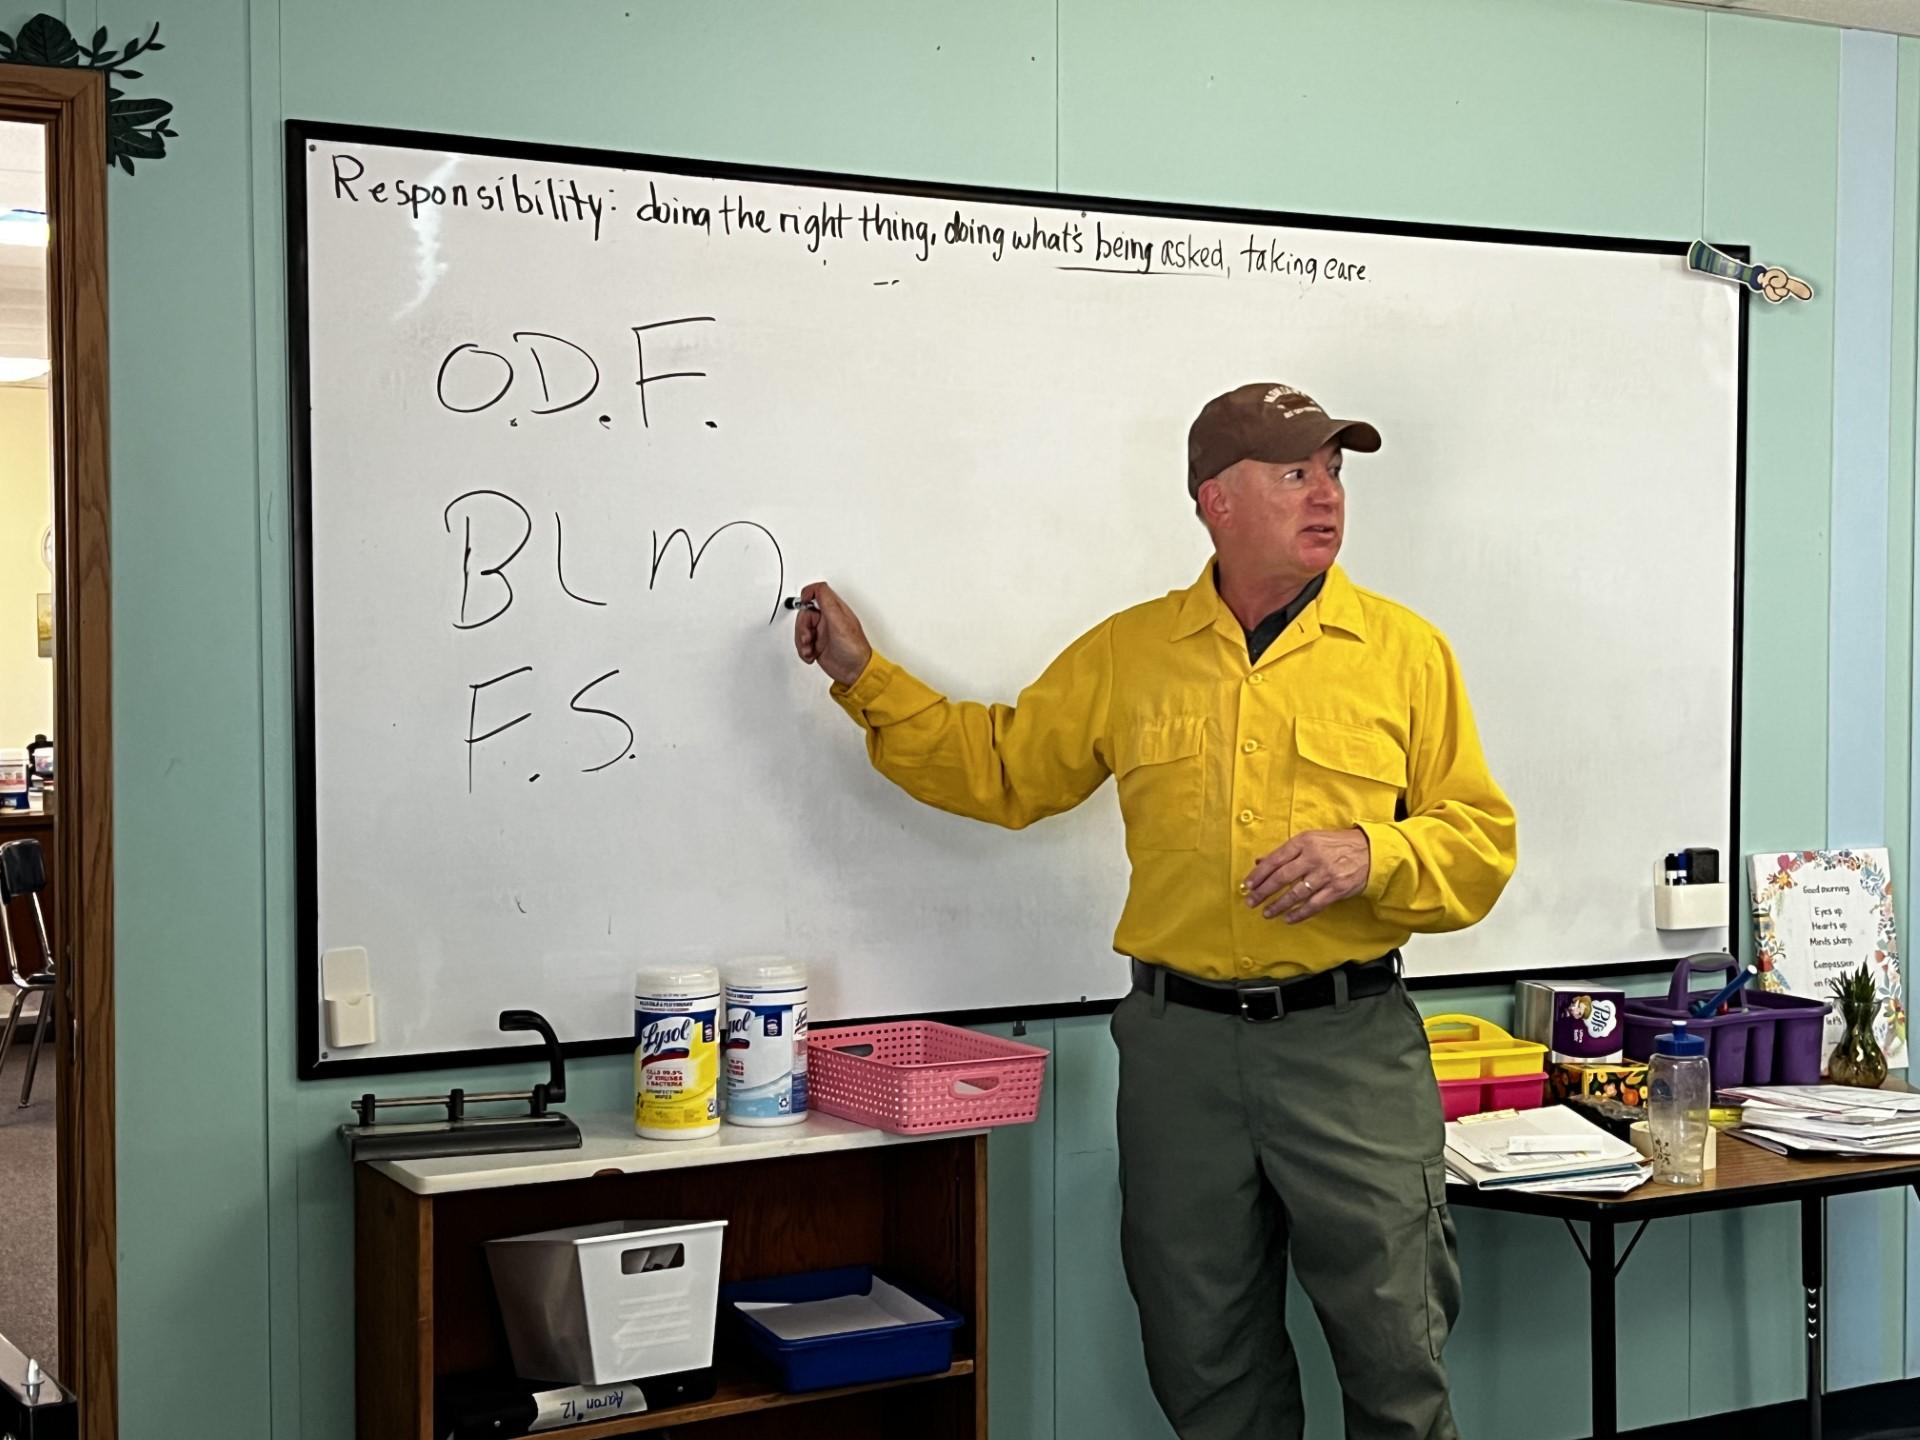 Firefighter stands by white board that lists different agencies: ODF, BLM, FS